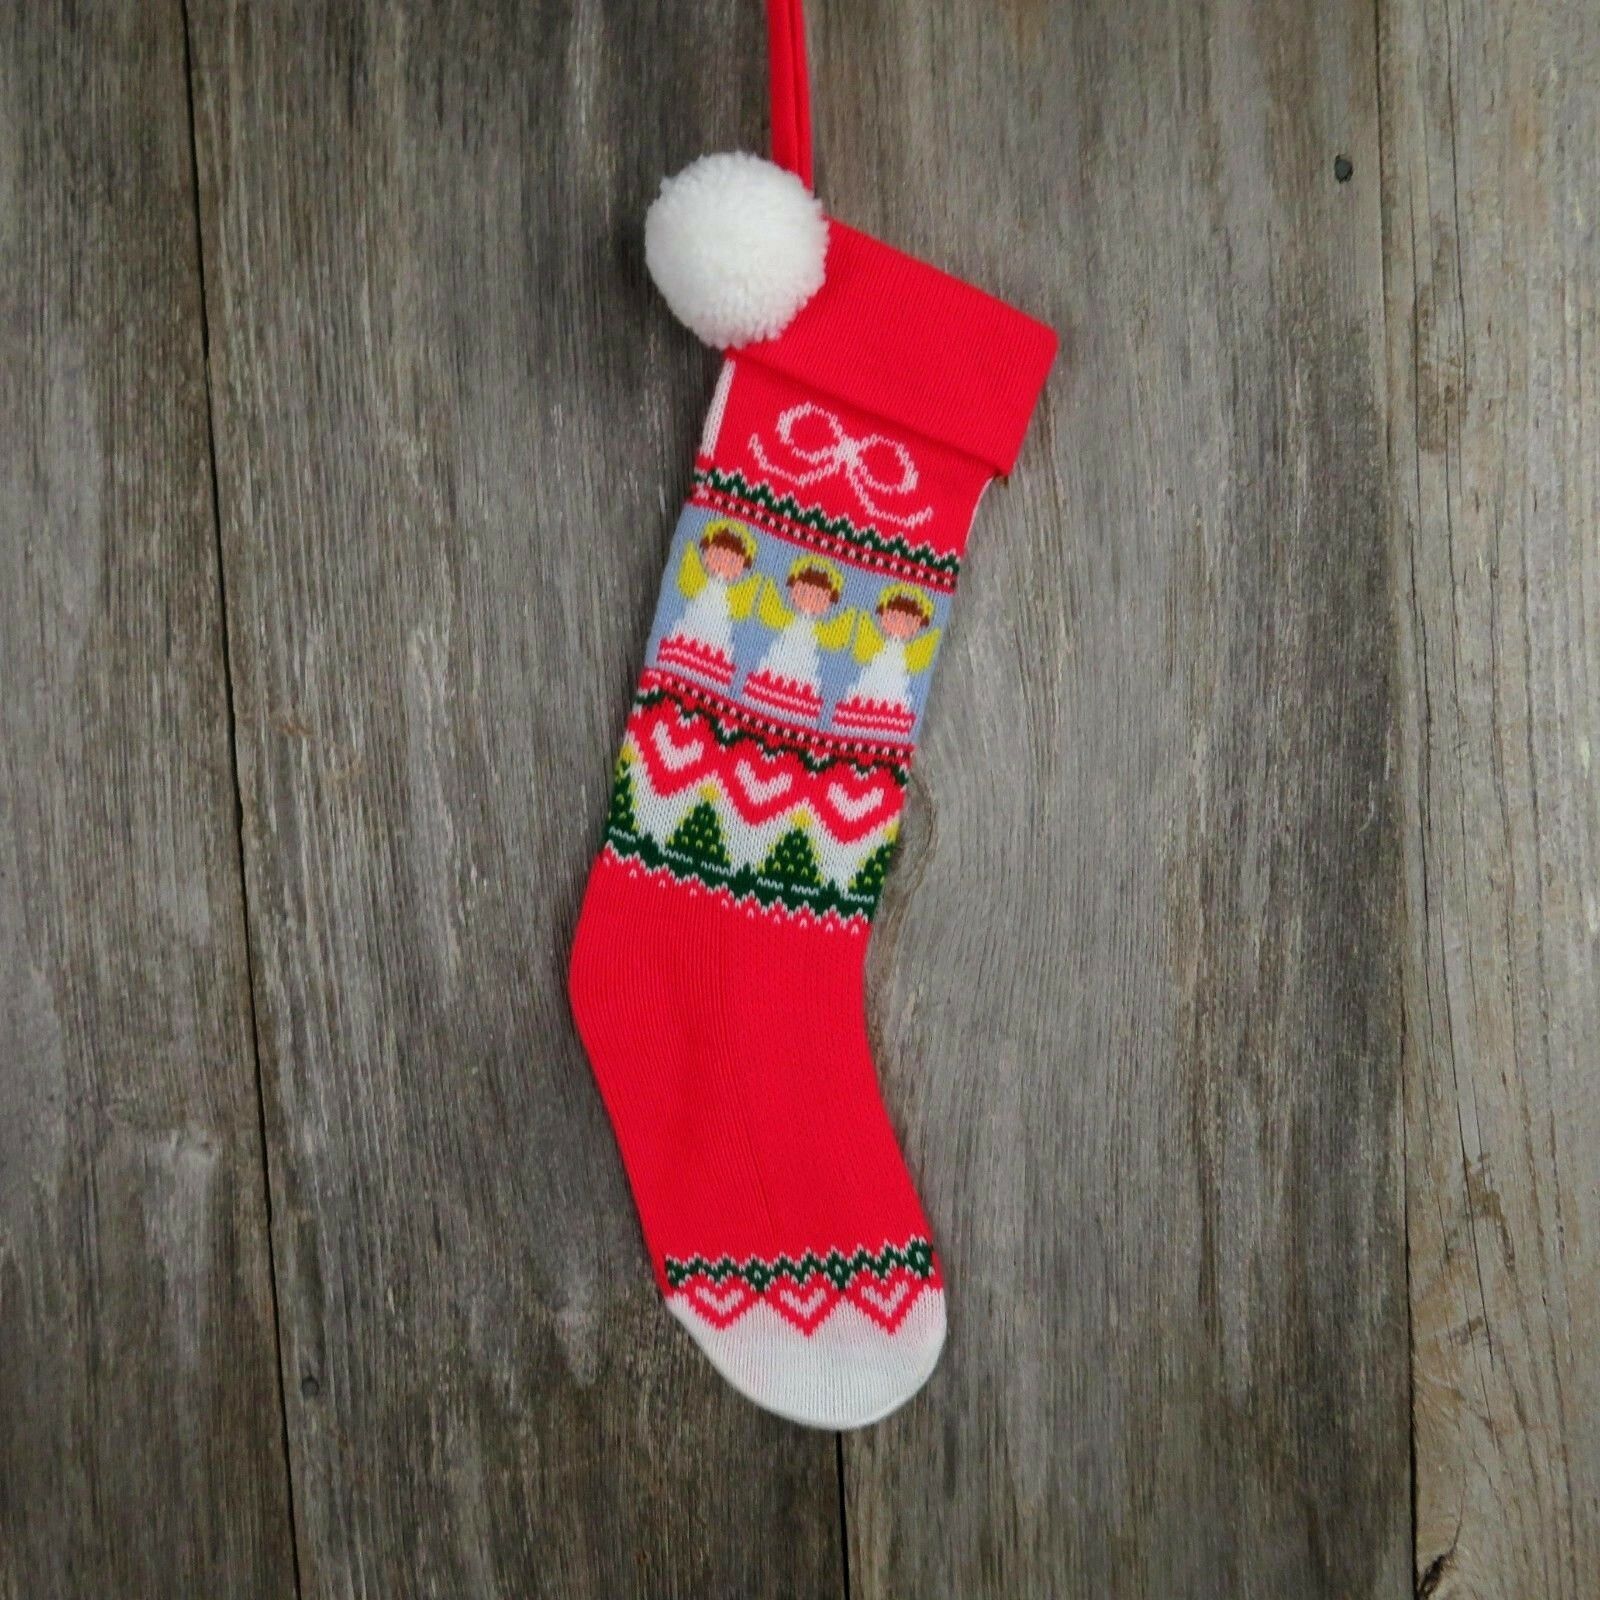 Vintage Angel Hearts Stocking Christmas Hallmark Knitted Knit Green Red Blue - At Grandma's Table